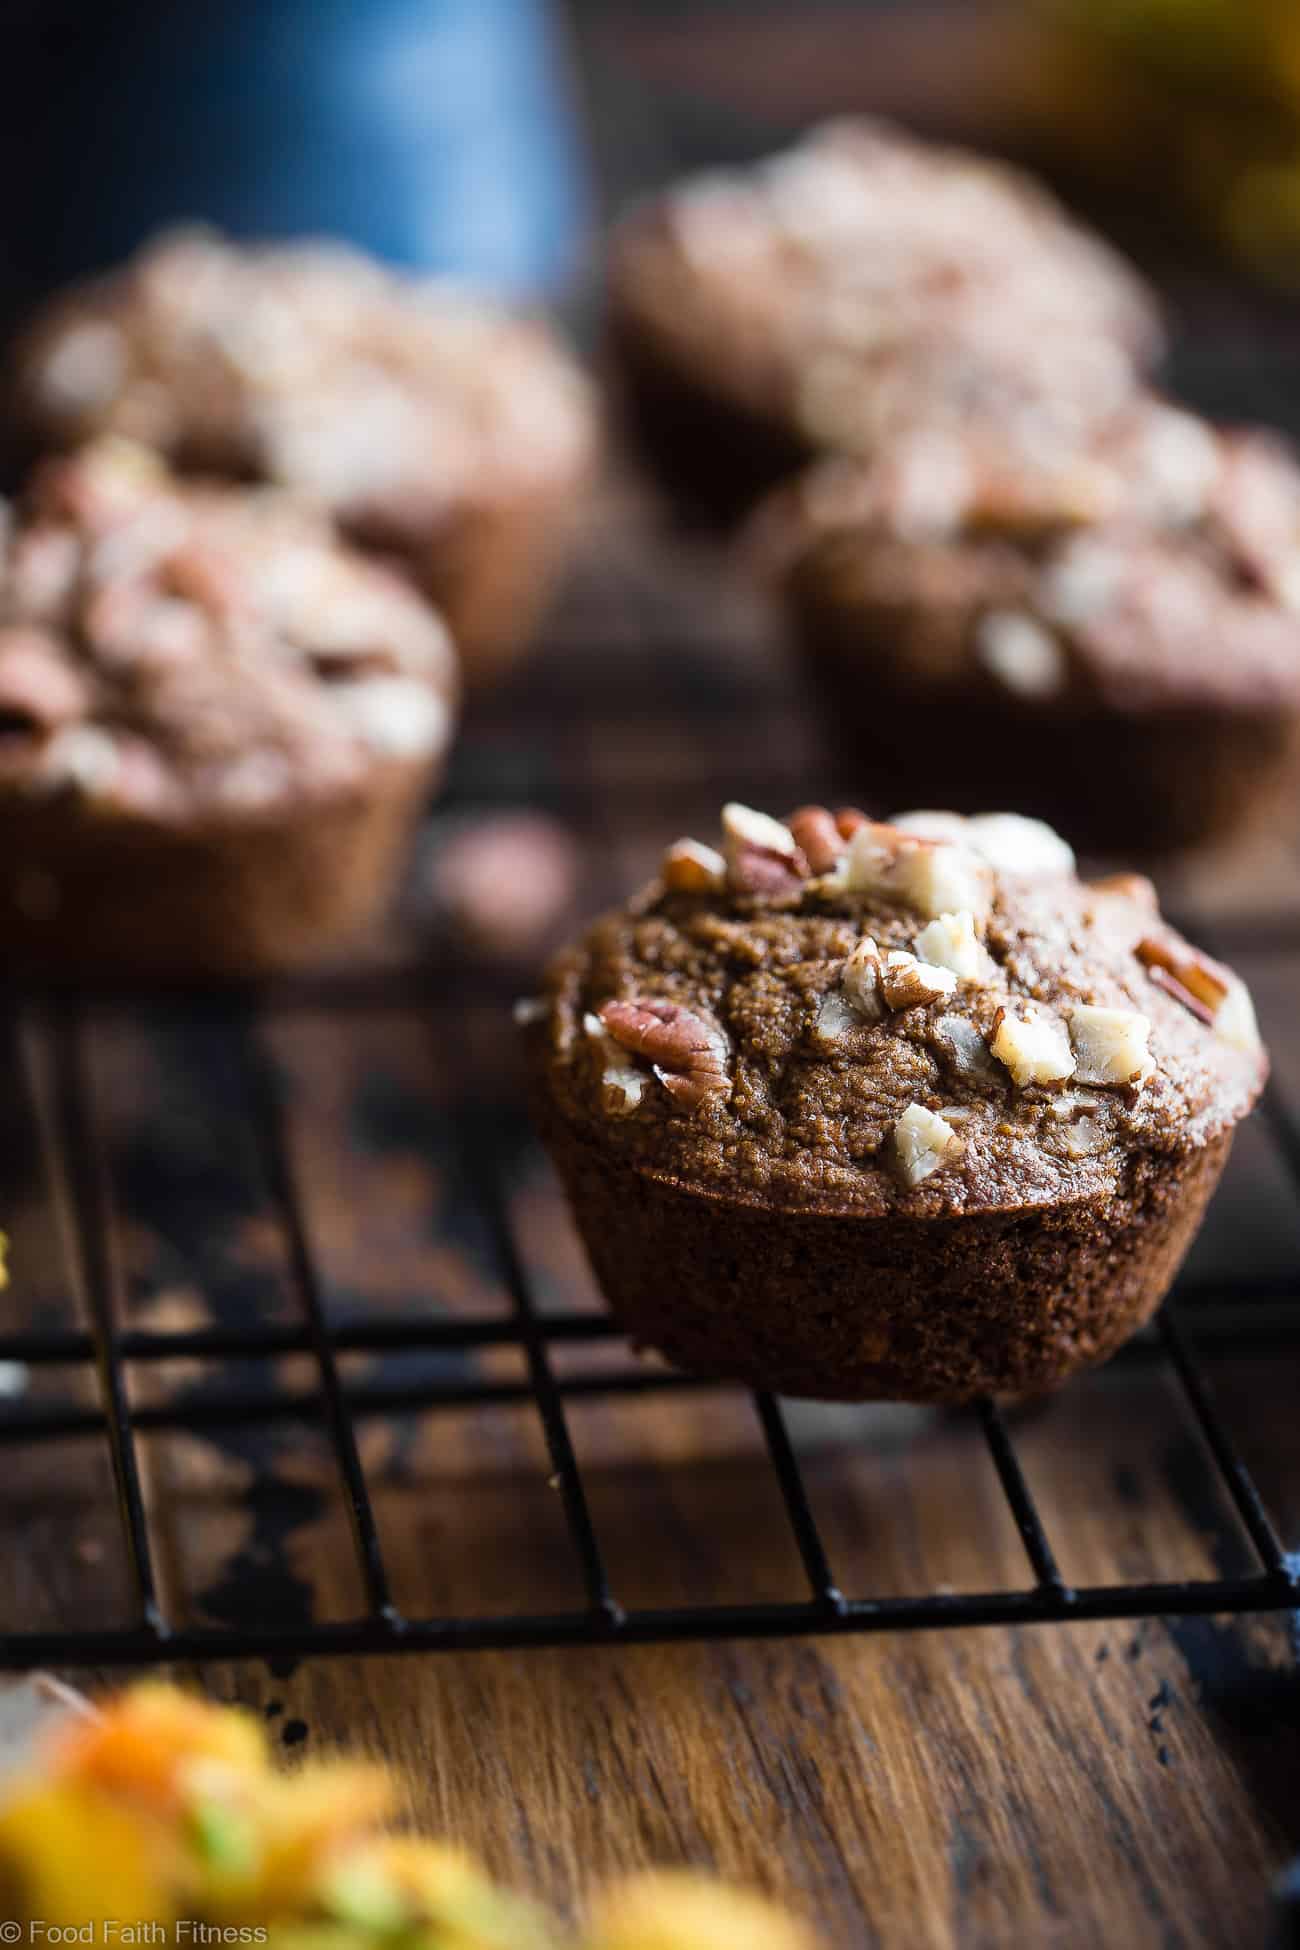 Gluten Free Healthy Carrot Cake Muffins - These easy carrot muffins are quick, simple and made from pantry-essential ingredients! Perfect for a quick breakfast or snack and use Greek yogurt instead of oil! | #Foodfaithfitness | #Muffins #Glutenfree #Healthy #Carrotcake #Greekyogurt